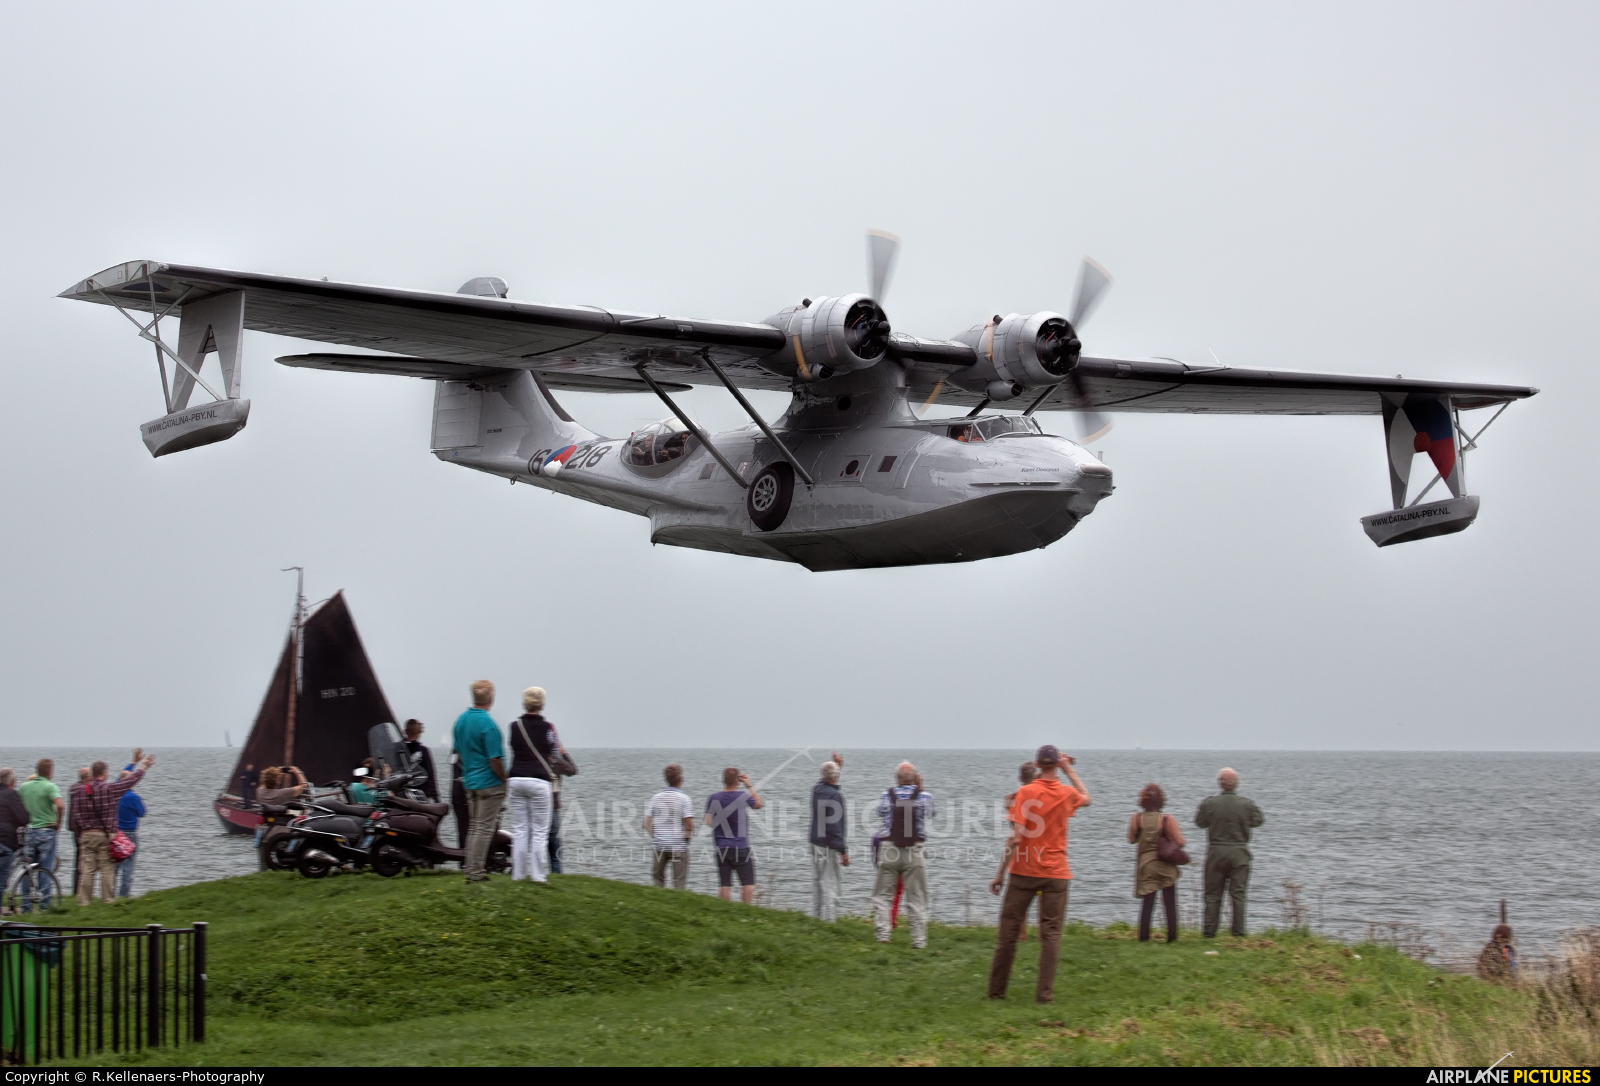 The Catalina Foundation PH-PBY aircraft at Off Airport - Netherlands